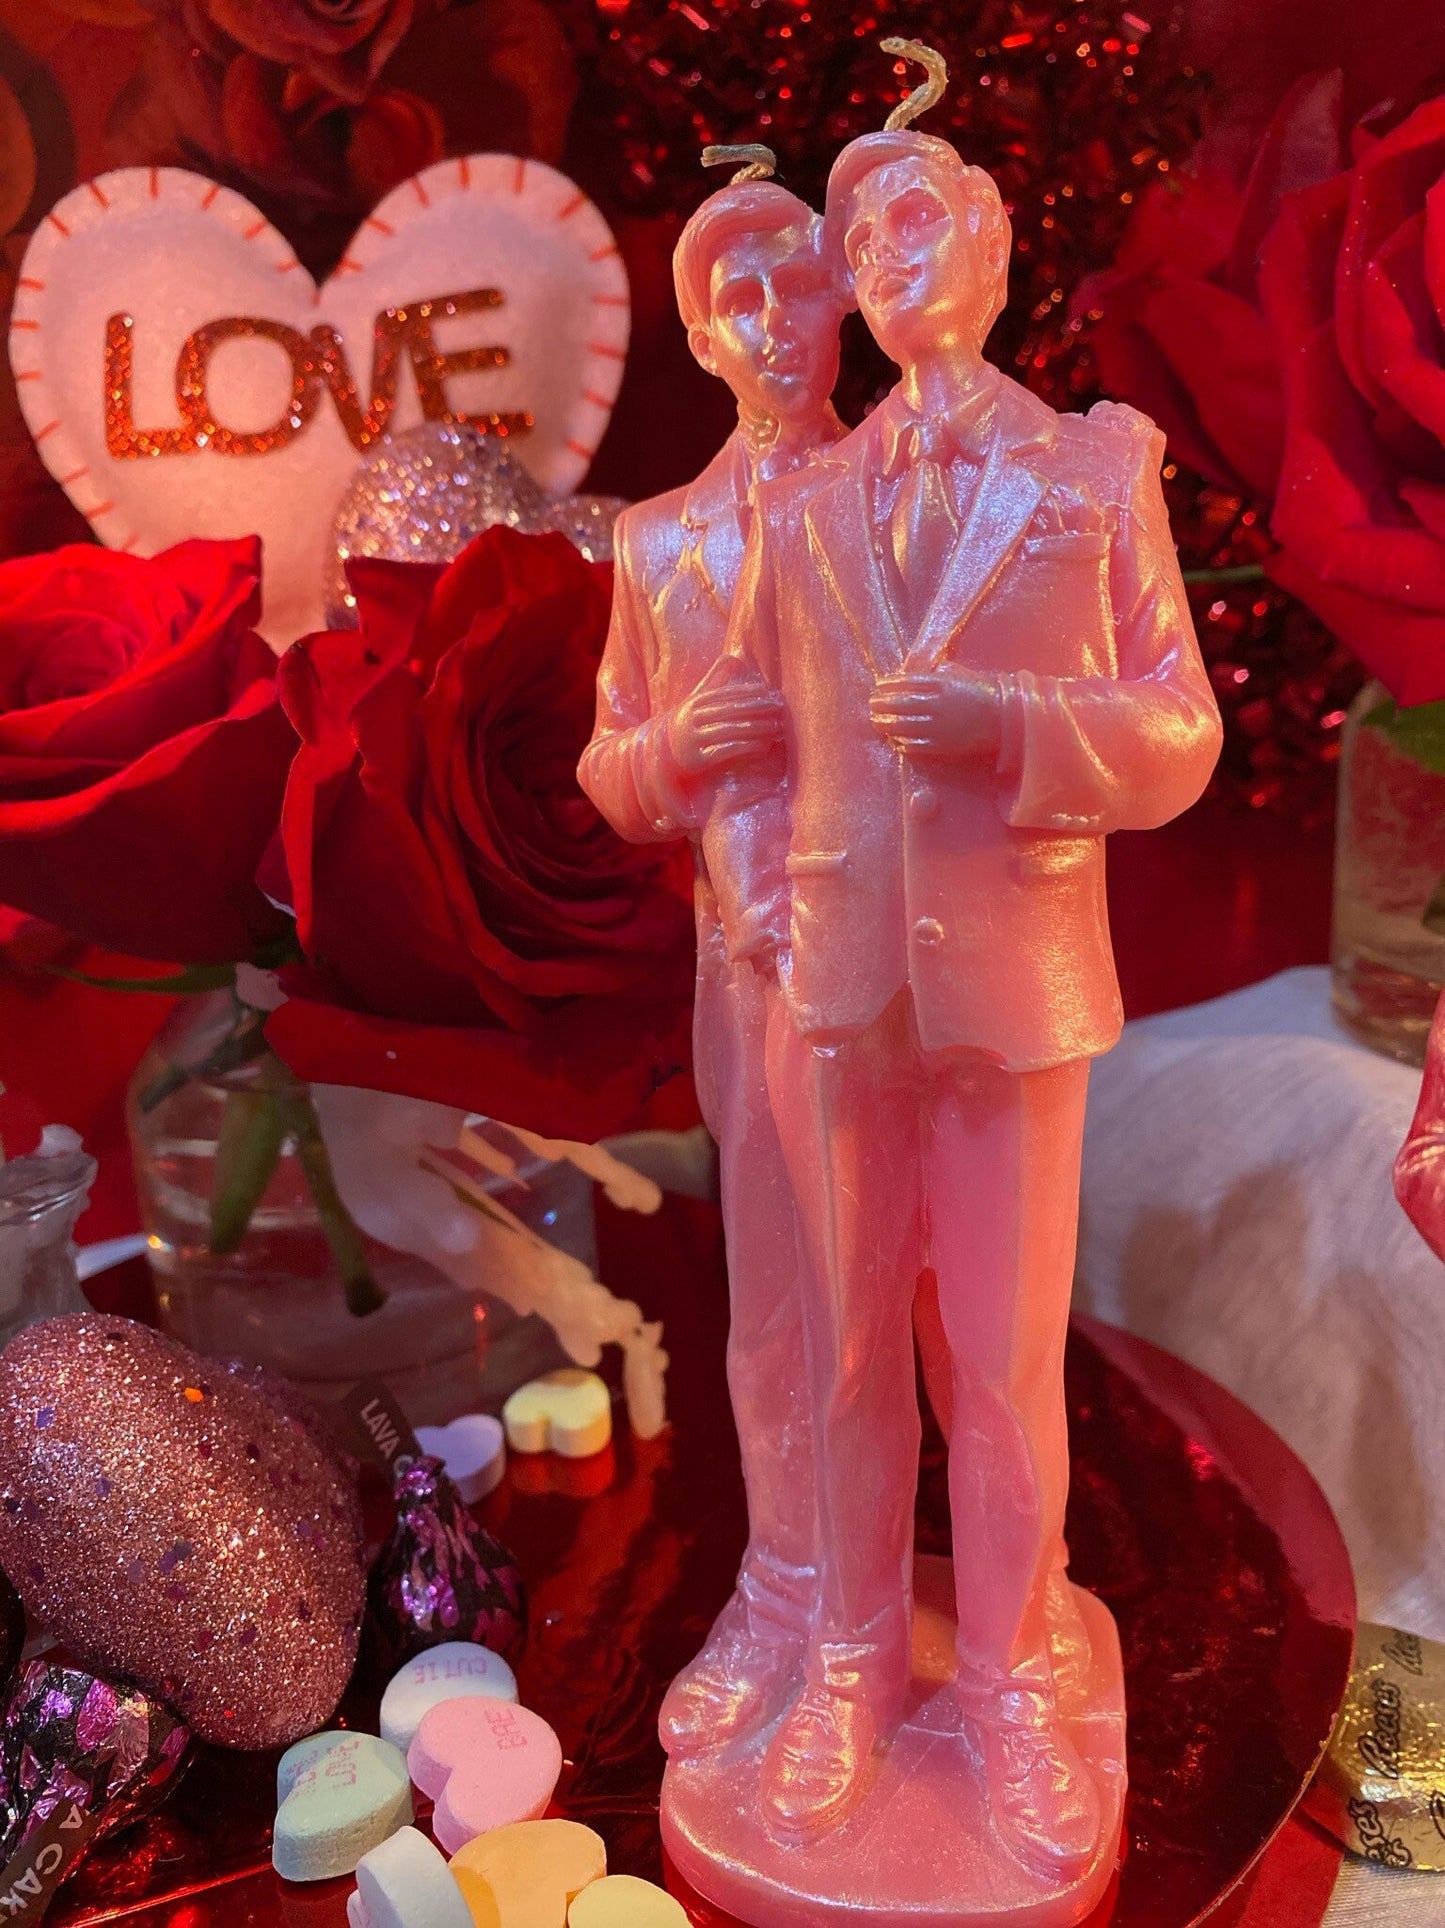 Gay Love Candle + Grooms + Marriage + Husbands + Friendship